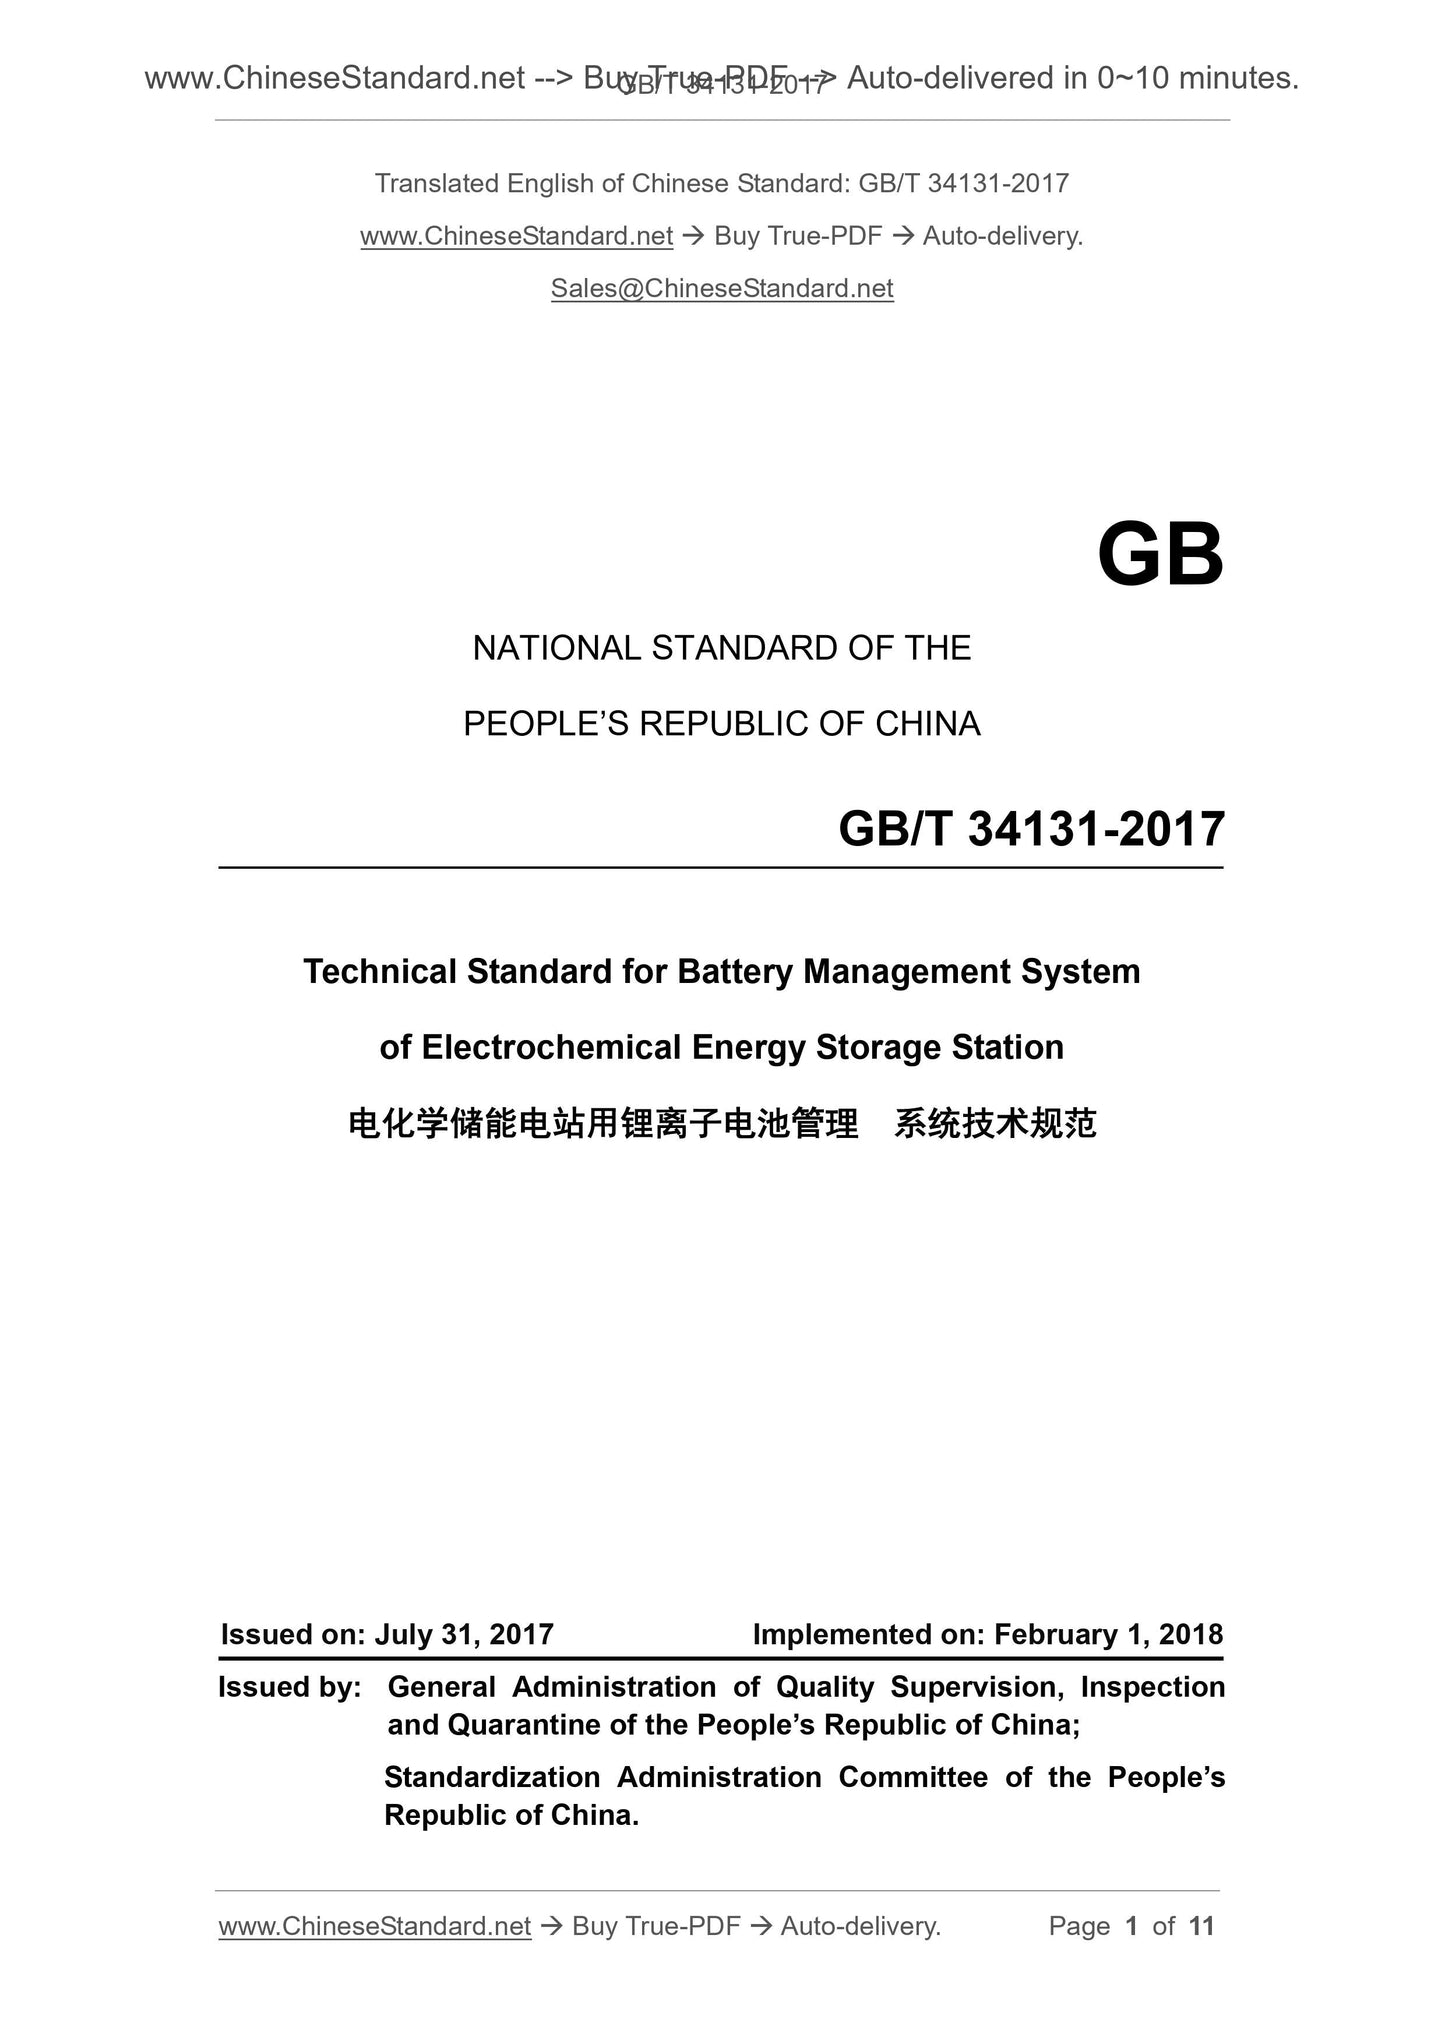 GB/T 34131-2017 Page 1